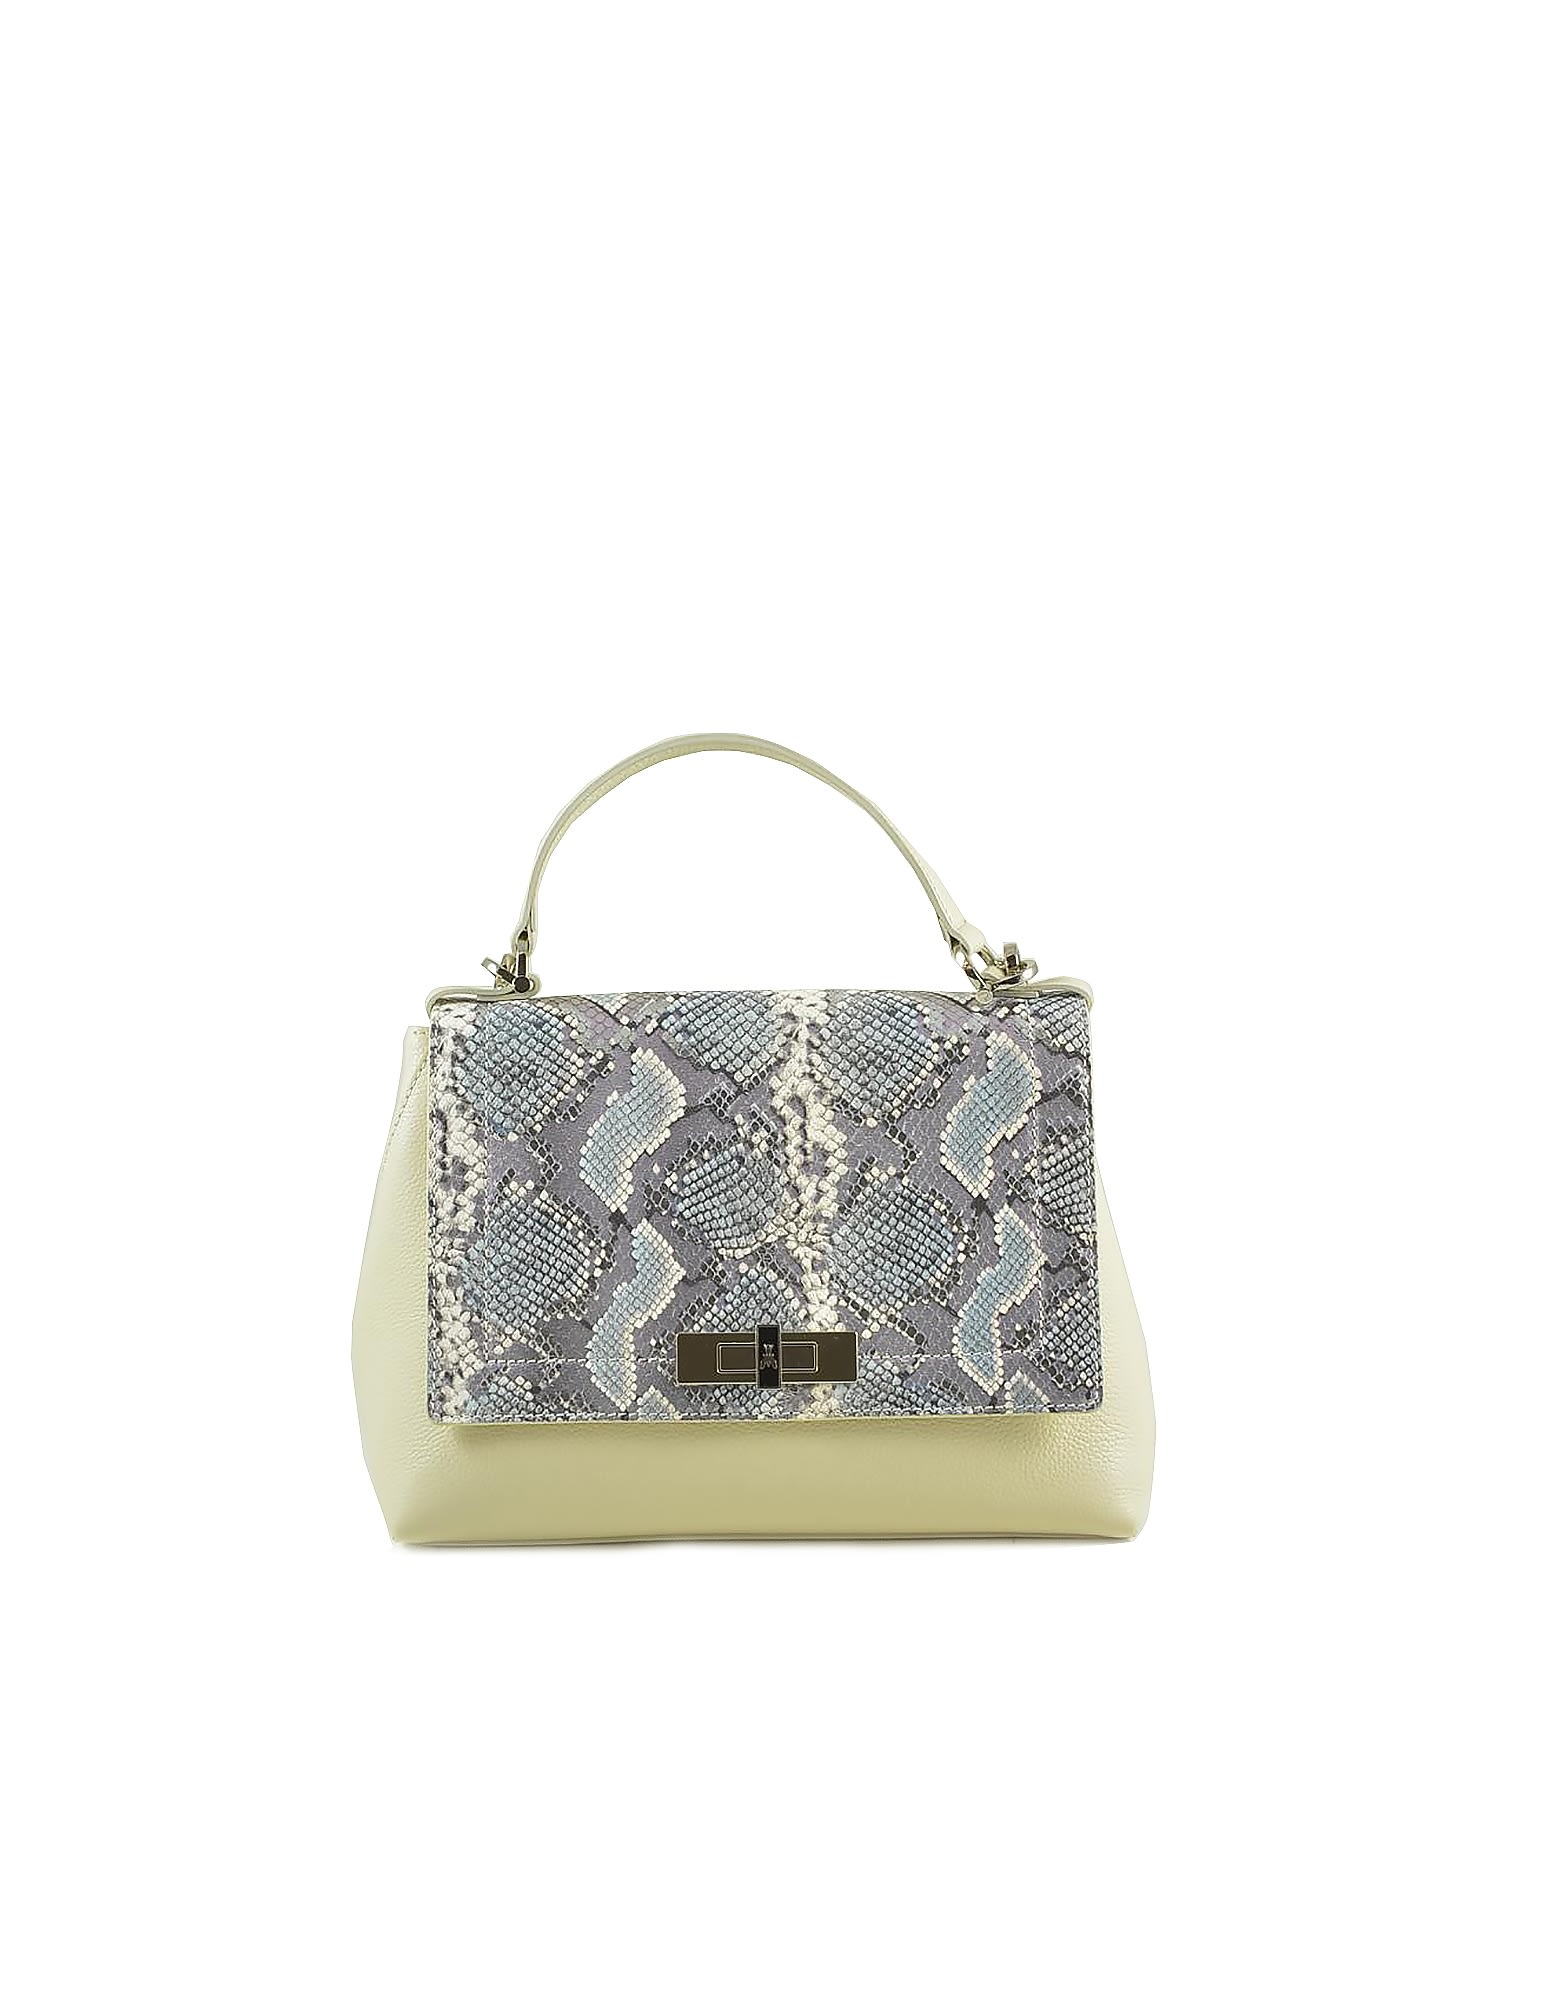 Patrizia Pepe Cream With Python Embossed Leather Flap Front Top Handle Satchel Bag